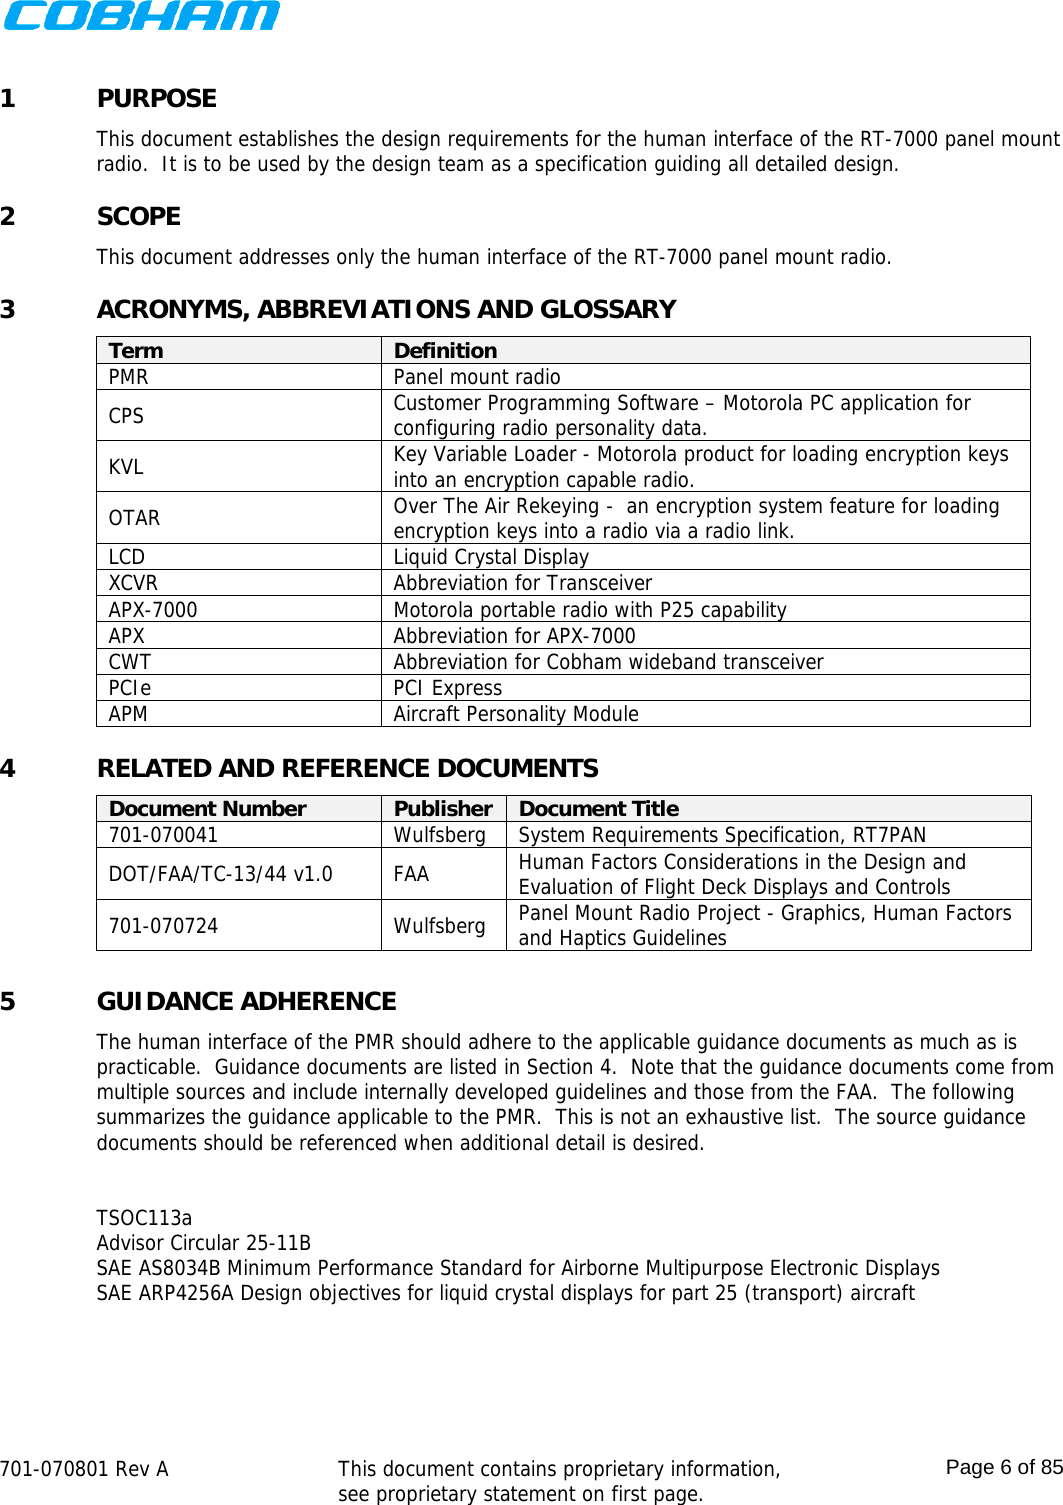    701-070801 Rev A   This document contains proprietary information, see proprietary statement on first page.  Page 6 of 85  1 PURPOSE This document establishes the design requirements for the human interface of the RT-7000 panel mount radio.  It is to be used by the design team as a specification guiding all detailed design. 2 SCOPE This document addresses only the human interface of the RT-7000 panel mount radio. 3 ACRONYMS, ABBREVIATIONS AND GLOSSARY Term  Definition PMR Panel mount radio CPS  Customer Programming Software – Motorola PC application for configuring radio personality data. KVL  Key Variable Loader - Motorola product for loading encryption keys into an encryption capable radio. OTAR  Over The Air Rekeying -  an encryption system feature for loading encryption keys into a radio via a radio link. LCD  Liquid Crystal Display XCVR  Abbreviation for Transceiver APX-7000  Motorola portable radio with P25 capability APX  Abbreviation for APX-7000 CWT  Abbreviation for Cobham wideband transceiver PCIe PCI Express APM  Aircraft Personality Module 4 RELATED AND REFERENCE DOCUMENTS Document Number  Publisher  Document Title 701-070041  Wulfsberg  System Requirements Specification, RT7PAN DOT/FAA/TC-13/44 v1.0  FAA  Human Factors Considerations in the Design and Evaluation of Flight Deck Displays and Controls 701-070724 Wulfsberg Panel Mount Radio Project - Graphics, Human Factors and Haptics Guidelines  5 GUIDANCE ADHERENCE The human interface of the PMR should adhere to the applicable guidance documents as much as is practicable.  Guidance documents are listed in Section 4.  Note that the guidance documents come from multiple sources and include internally developed guidelines and those from the FAA.  The following summarizes the guidance applicable to the PMR.  This is not an exhaustive list.  The source guidance documents should be referenced when additional detail is desired.  TSOC113a Advisor Circular 25-11B SAE AS8034B Minimum Performance Standard for Airborne Multipurpose Electronic Displays SAE ARP4256A Design objectives for liquid crystal displays for part 25 (transport) aircraft   